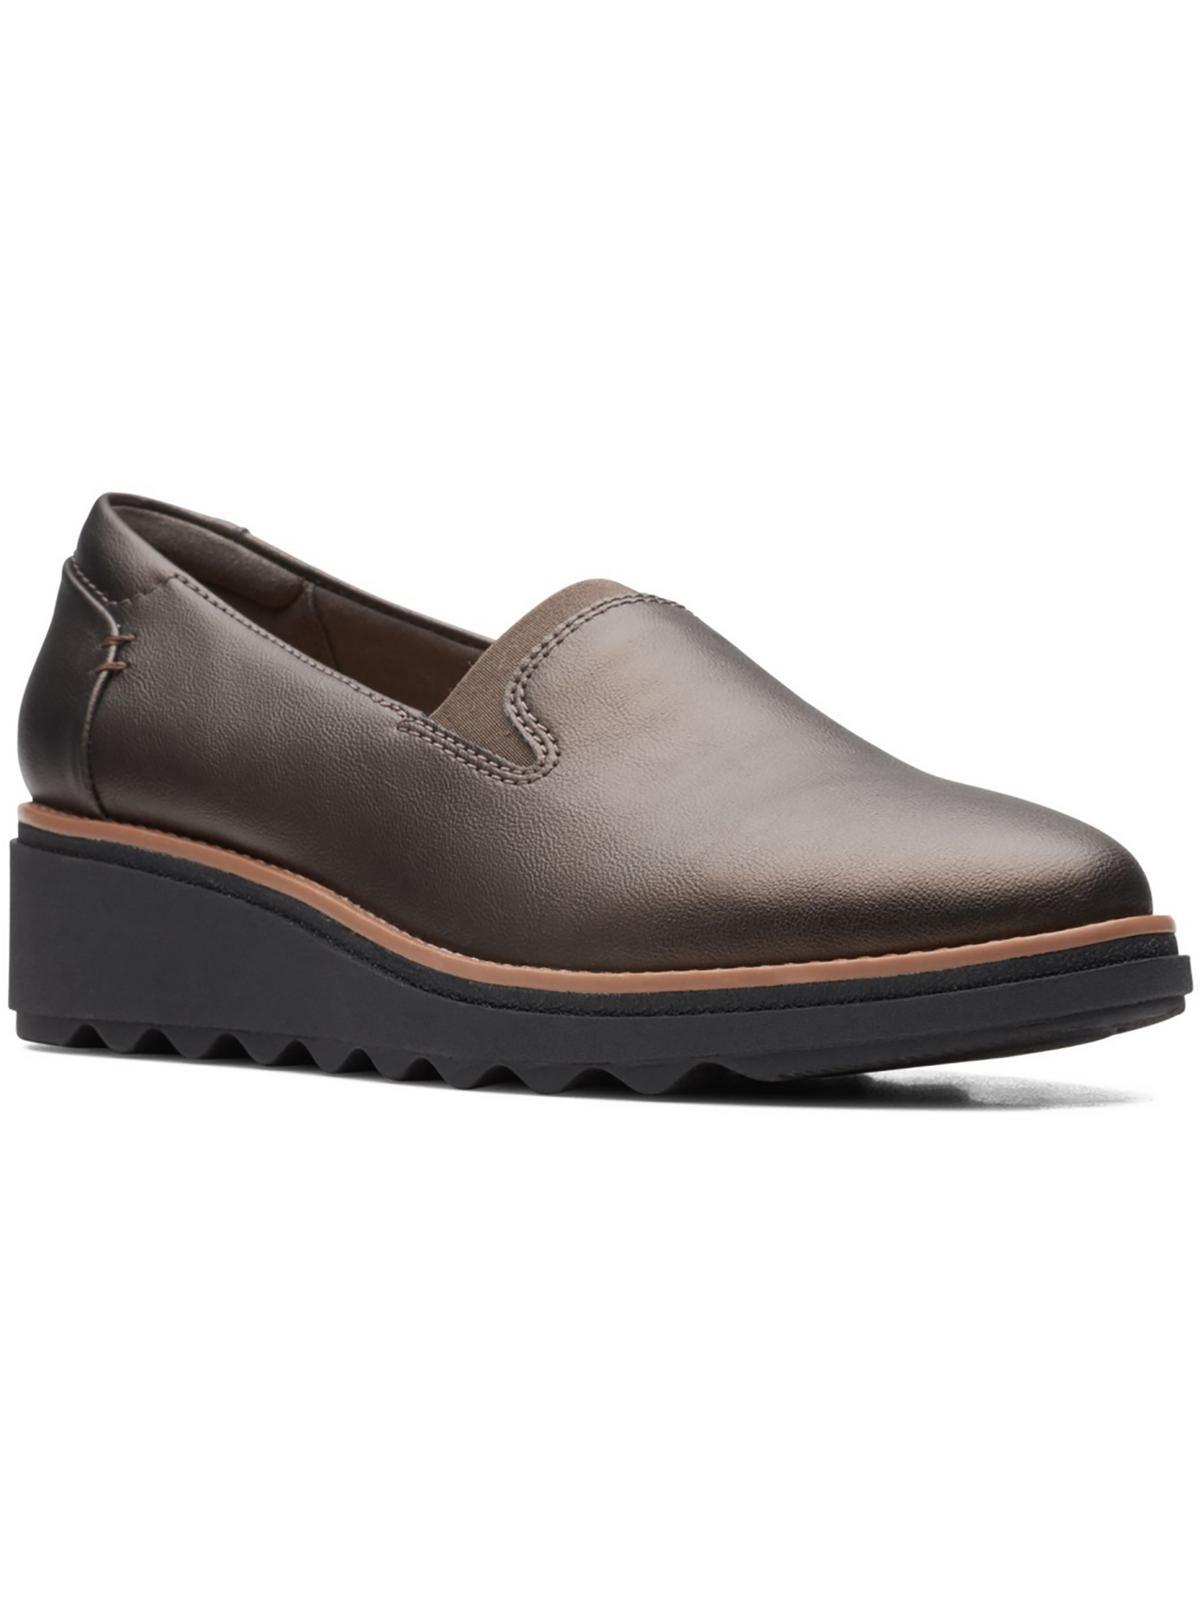 Clarks Sharon Dolly Slip On Loafers in Brown | Lyst